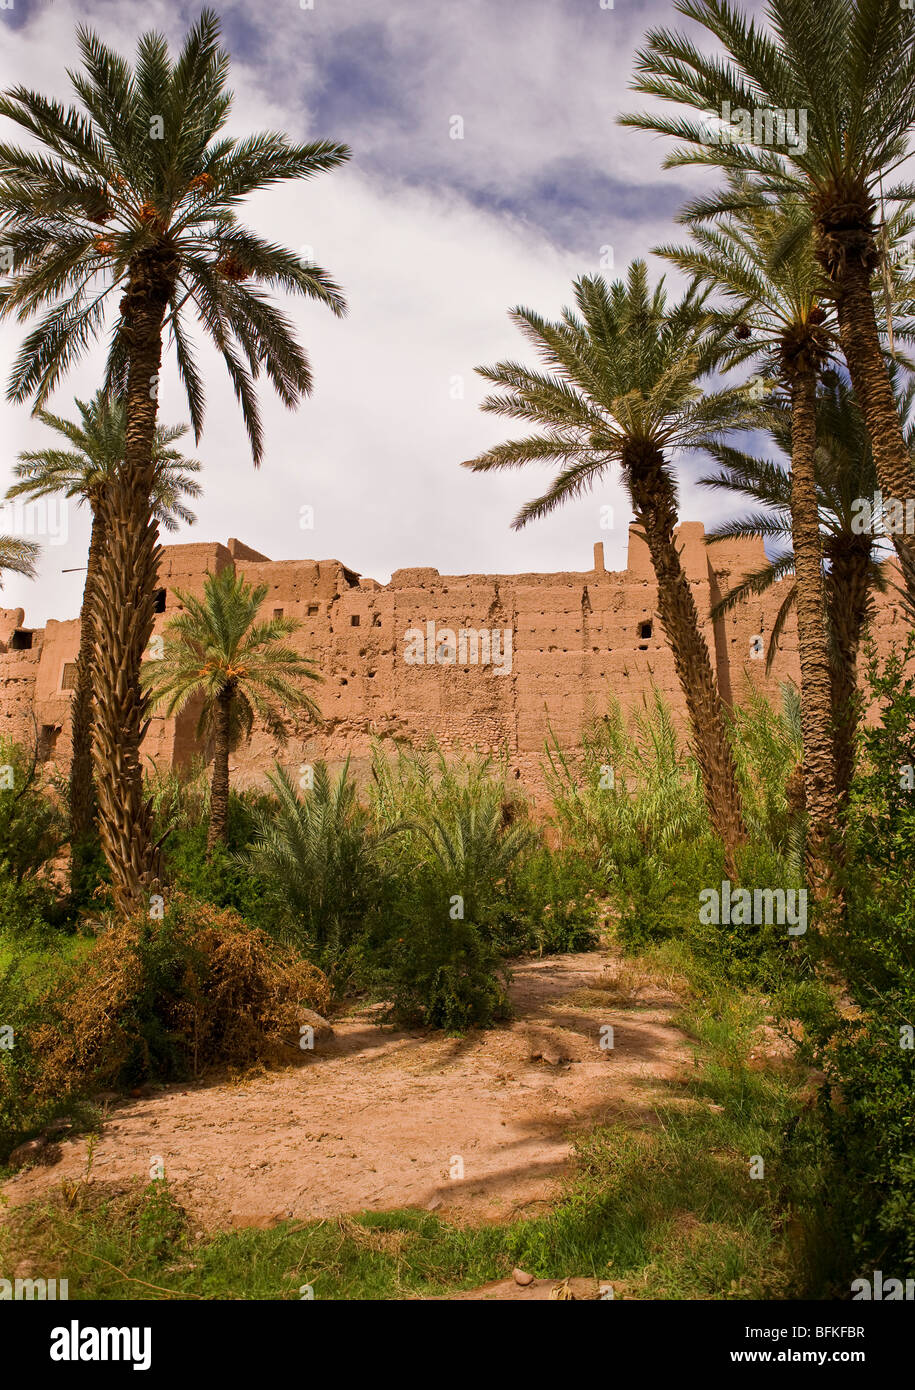 AGDZ, MOROCCO - Tamnougalt kasbah and palm trees, in the Atlas Mountains. Stock Photo